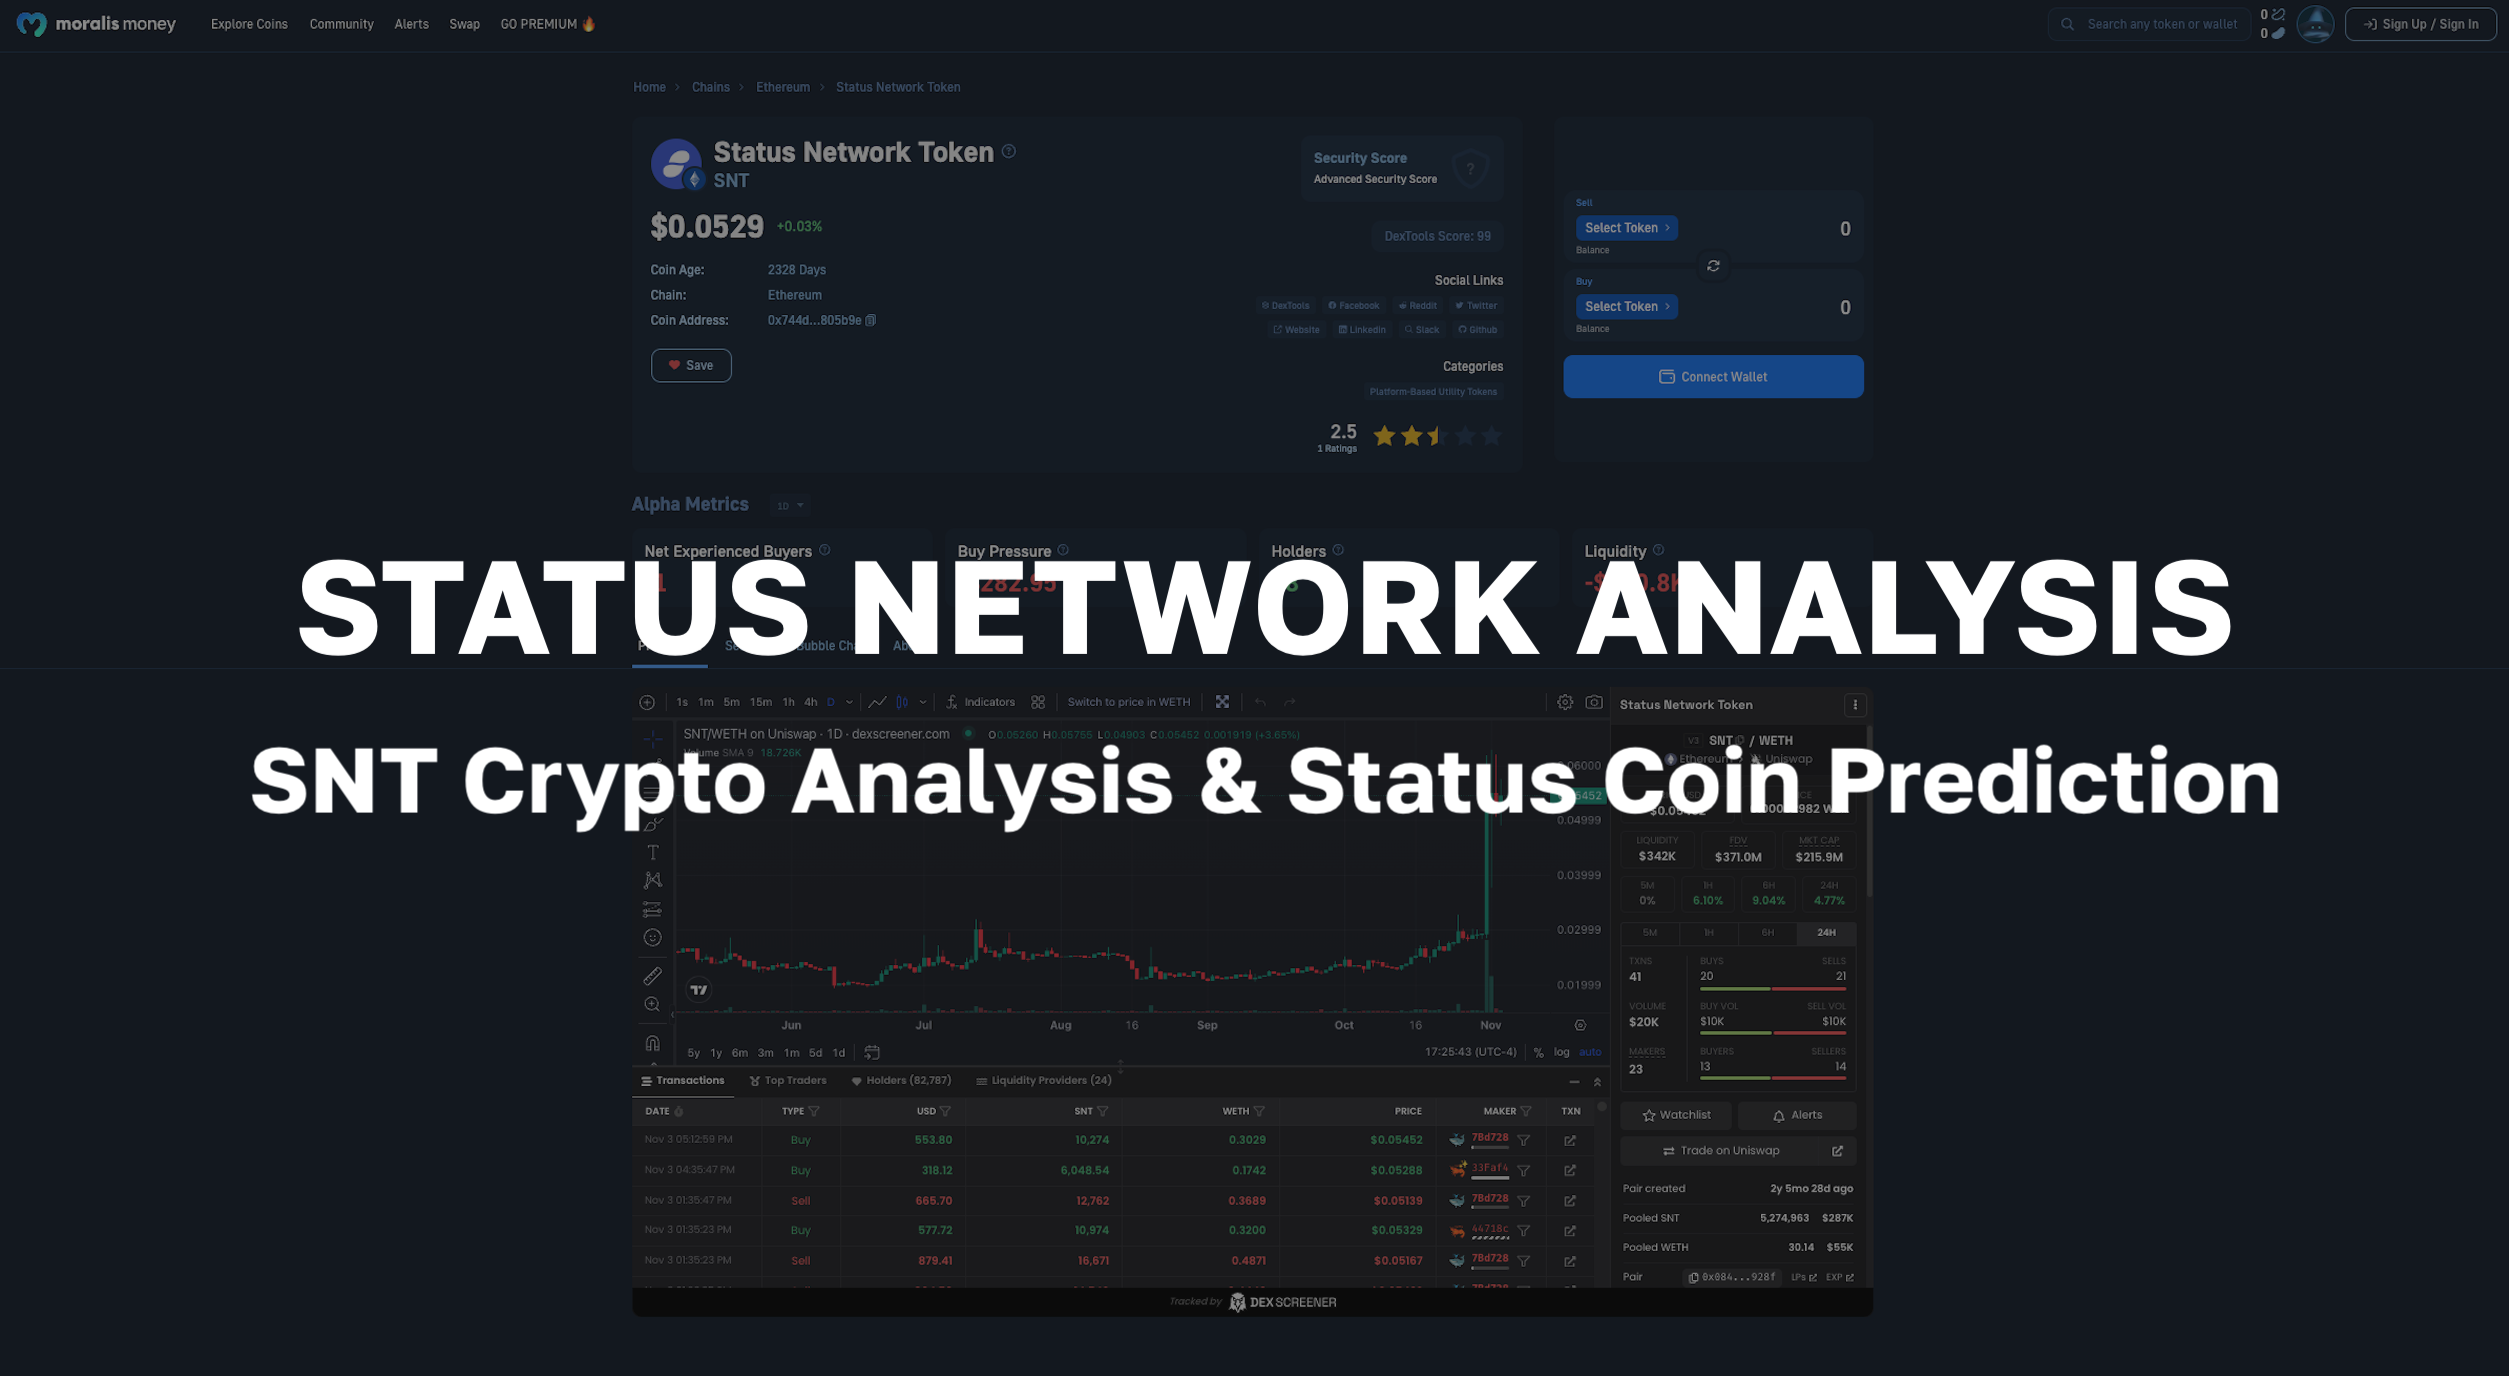 SNT Crypto Analysis and Status Coin Price Prediction